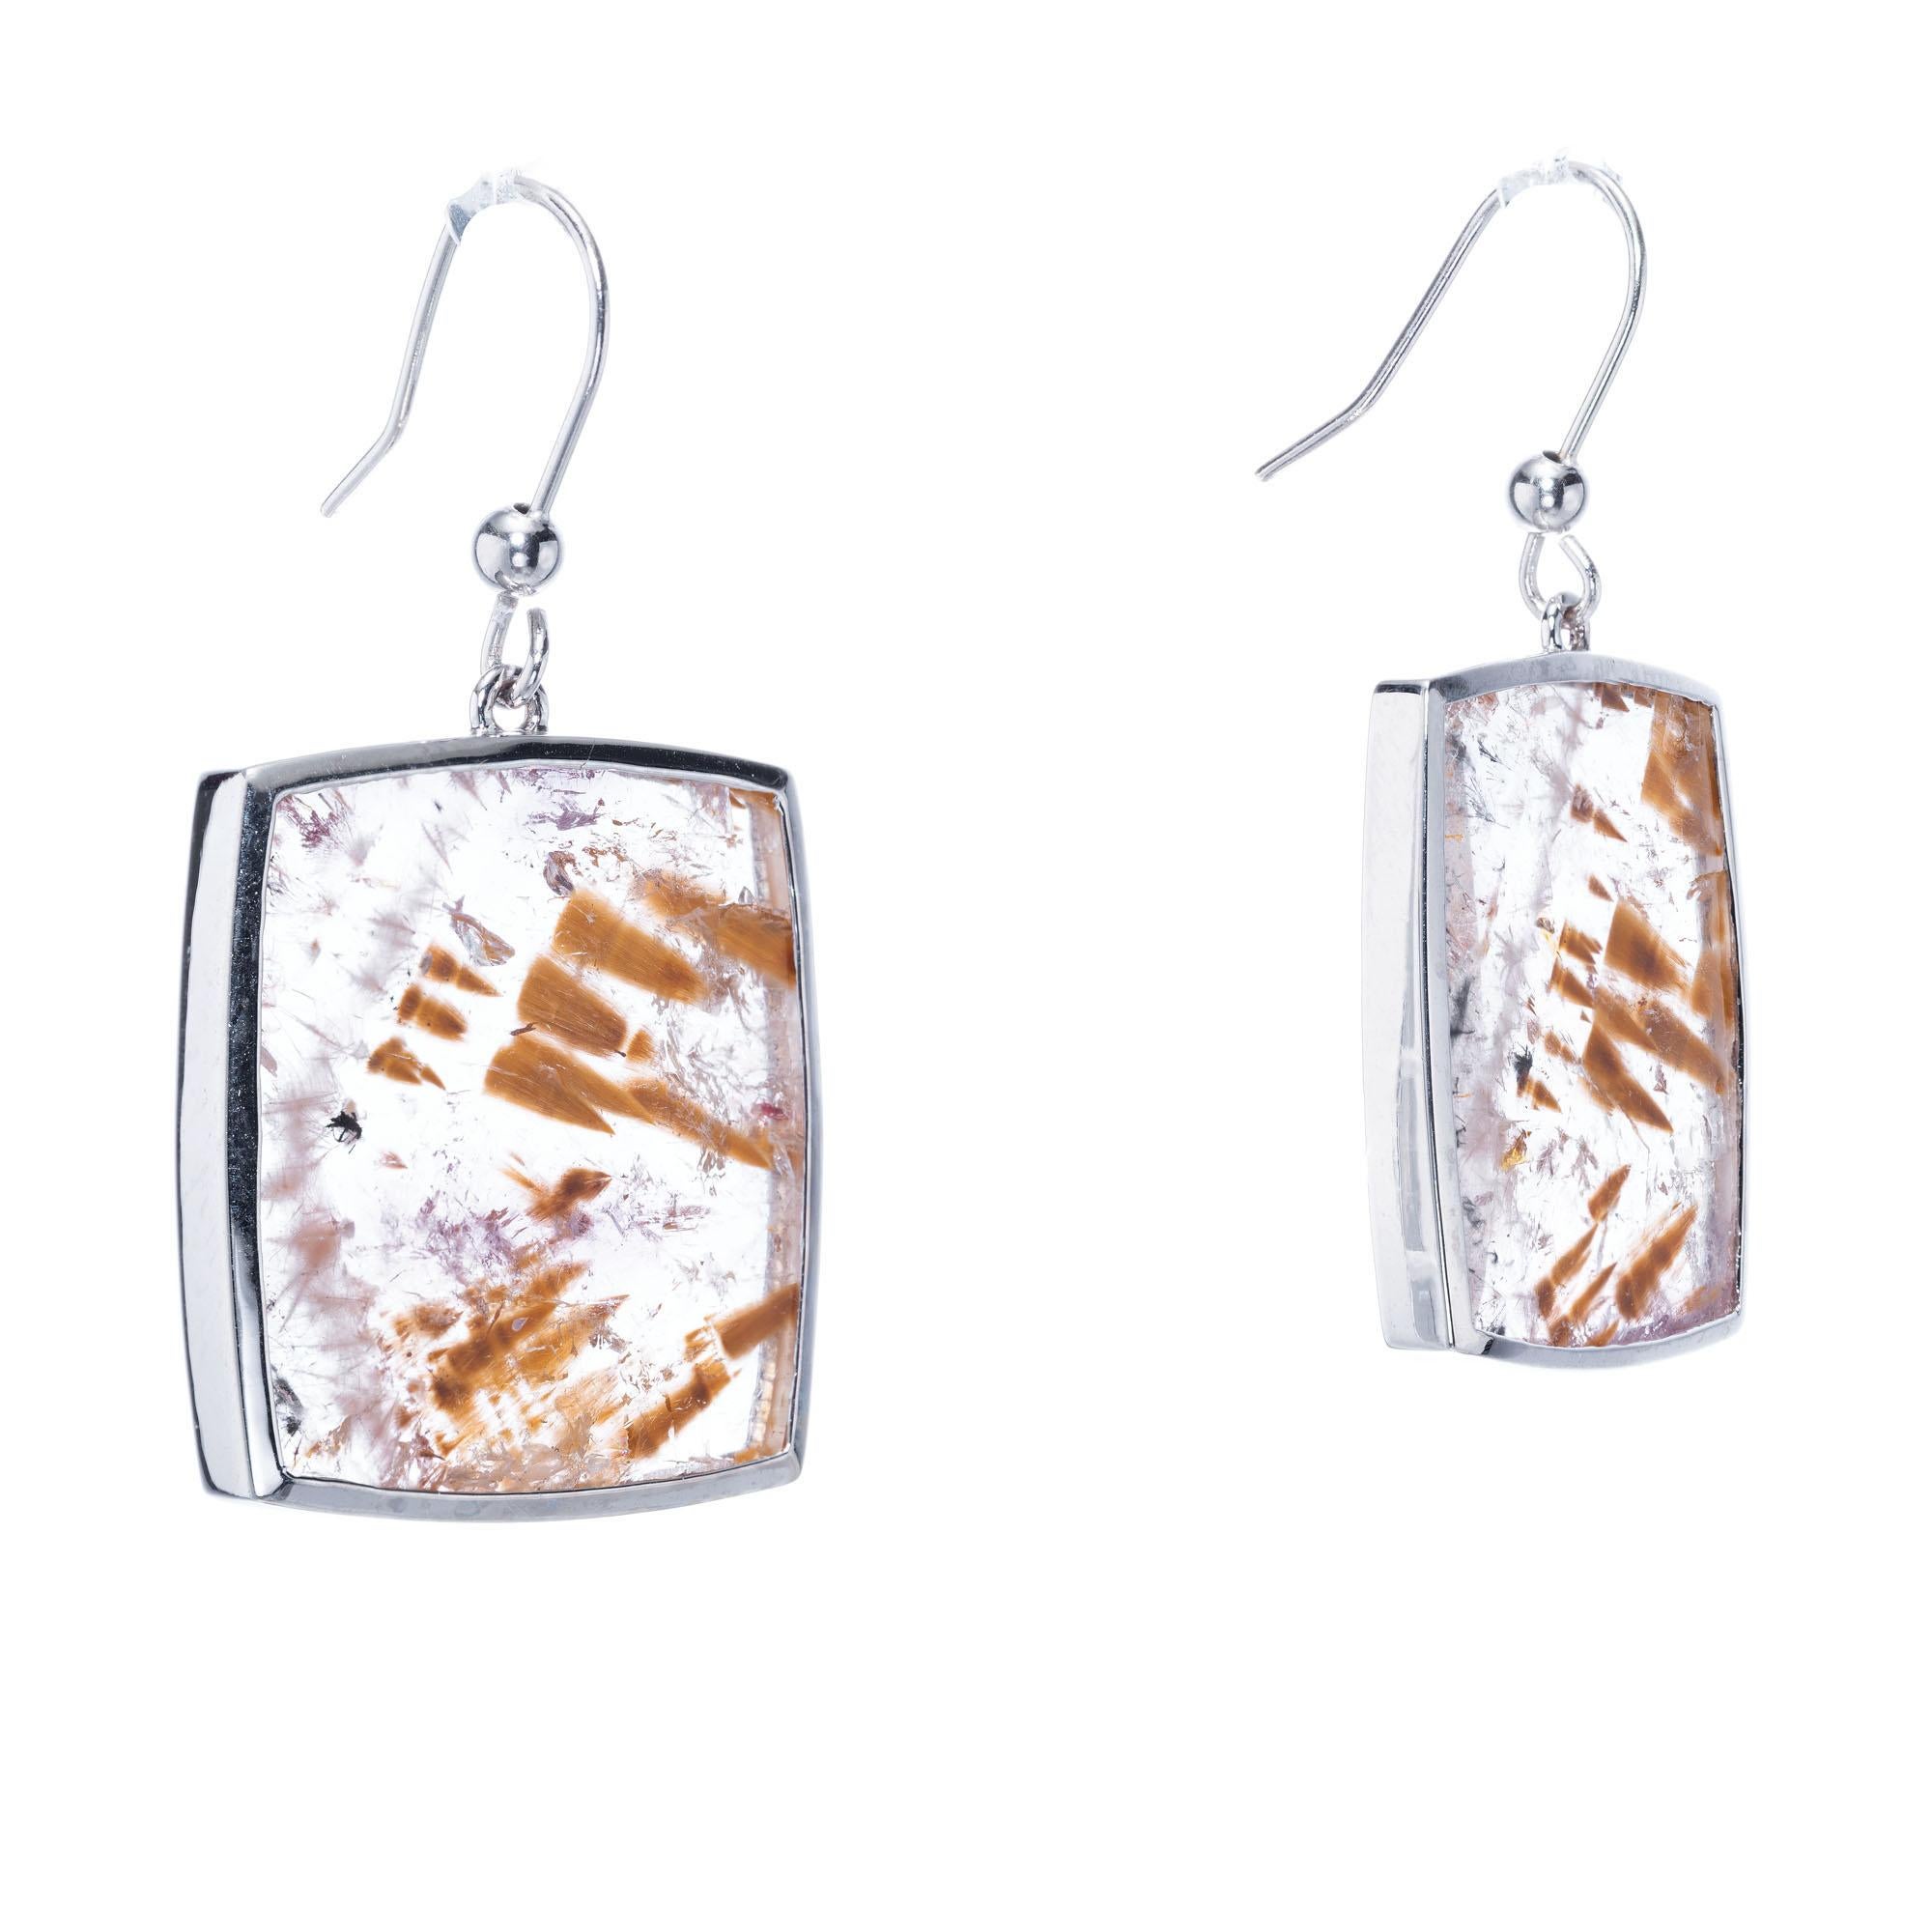 Natural clear Quartz crystal square's with mineral inclusions, set in handmade 18k white gold dangle settings, crafted in the Peter Suchy Workshop.

Natural clear Quartz with natural Cacoxenite and iron inclusions, approx. total weight 34.96cts
18k